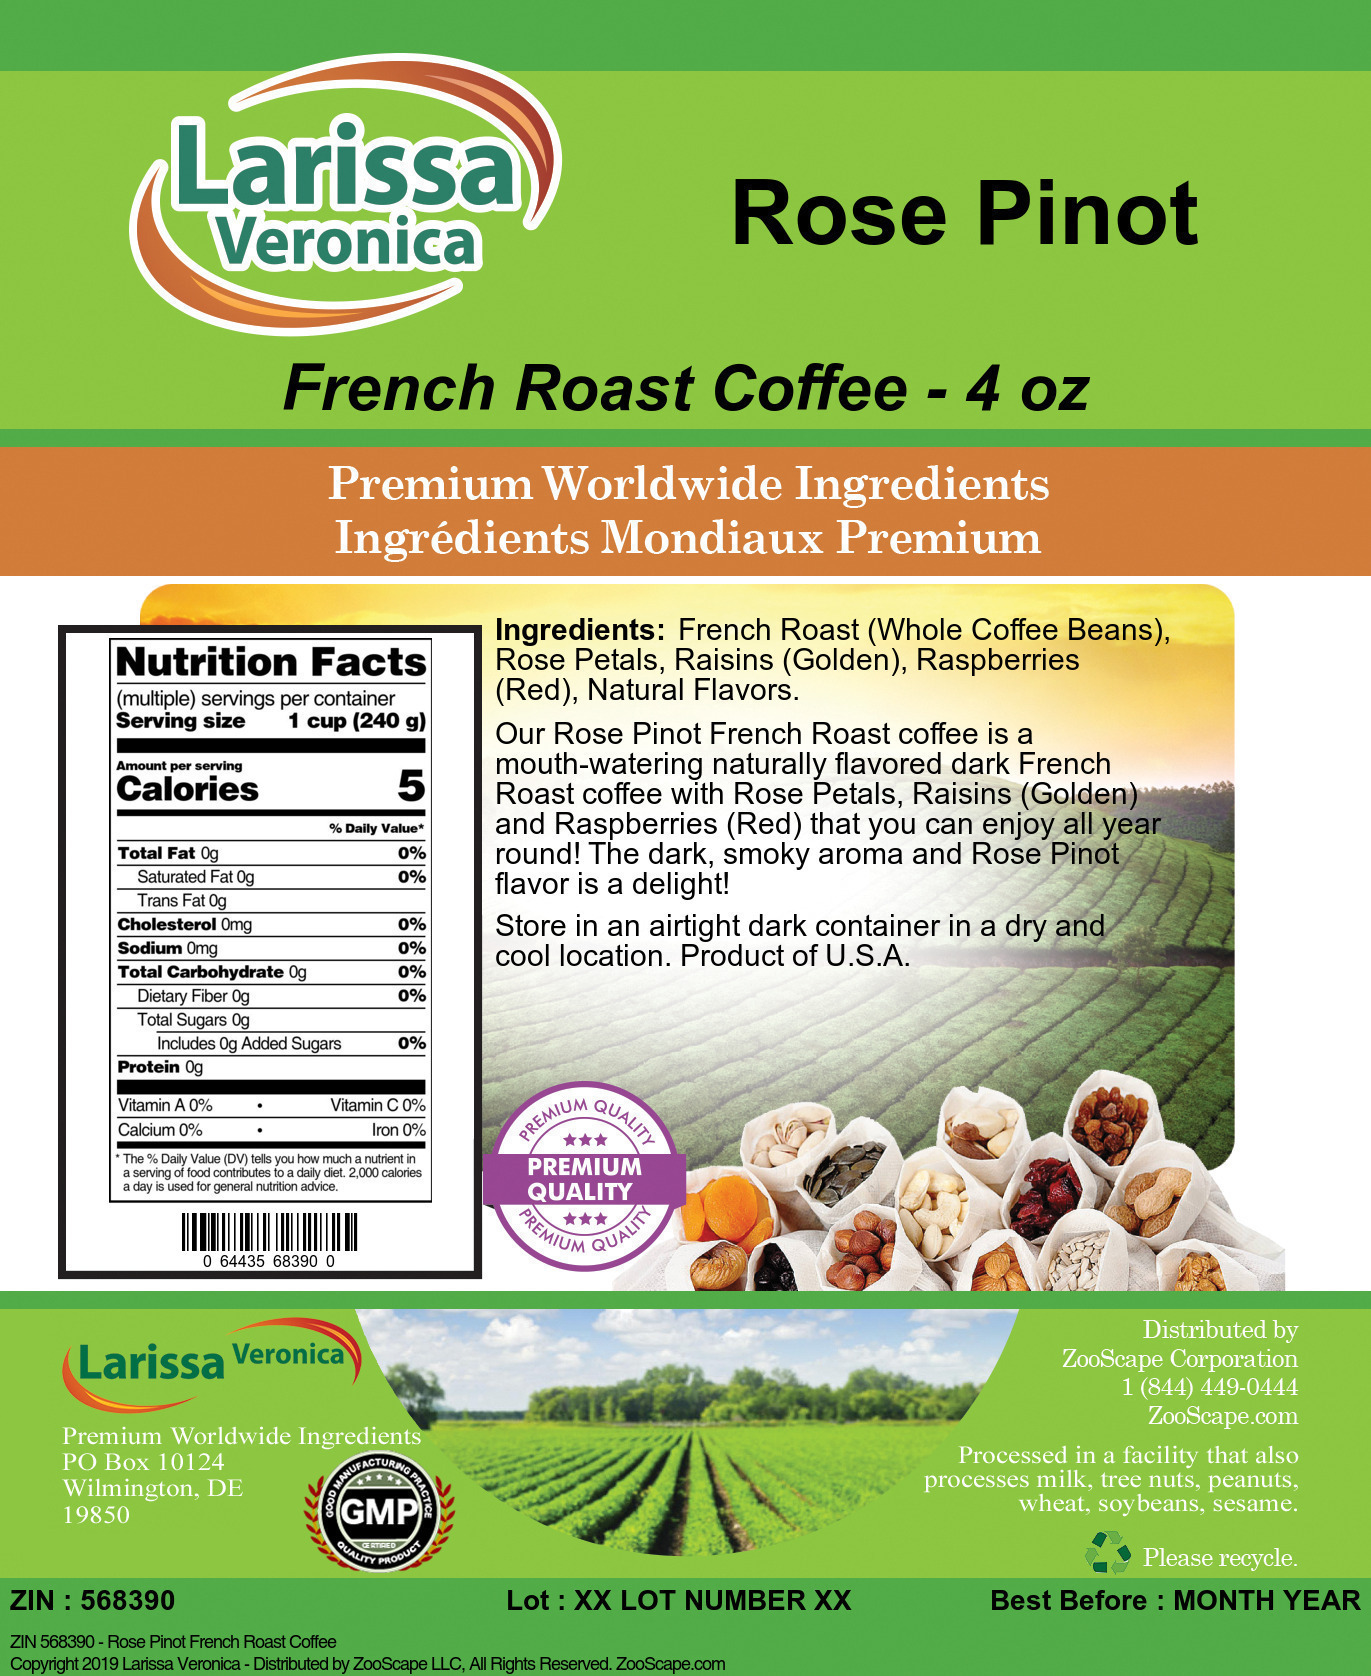 Rose Pinot French Roast Coffee - Label